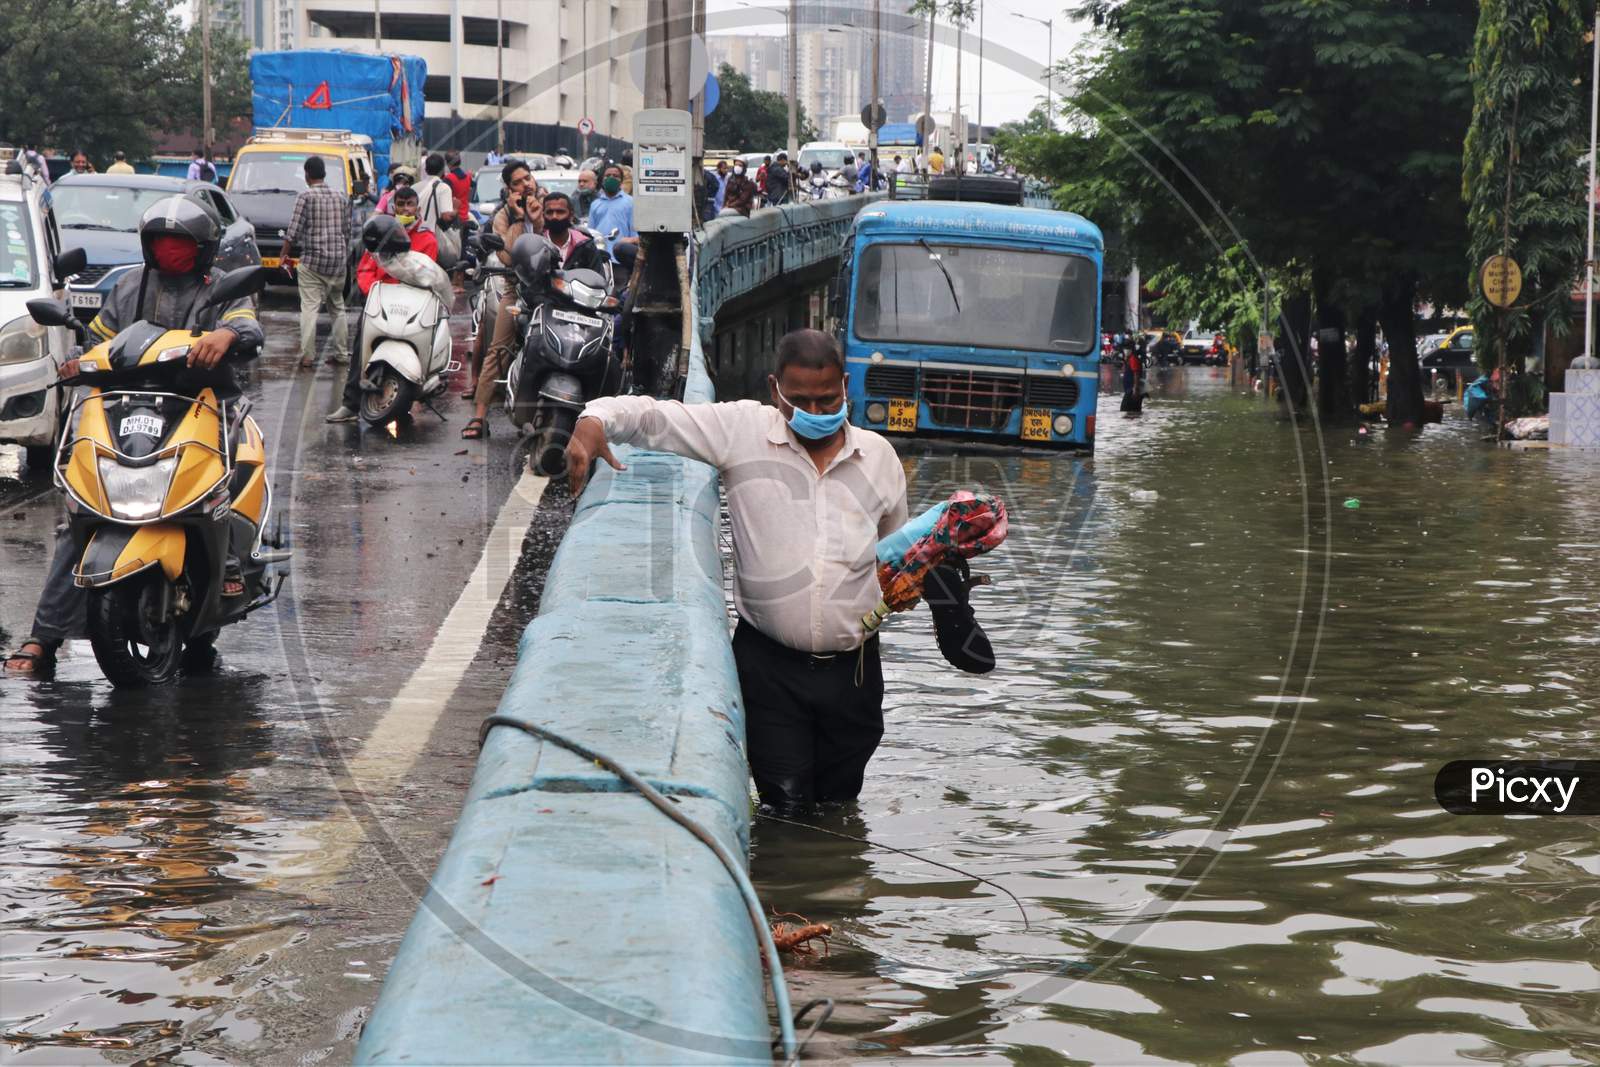 A man wades through a waterlogged road after heavy rainfall in Mumbai, India, September 23, 2020.